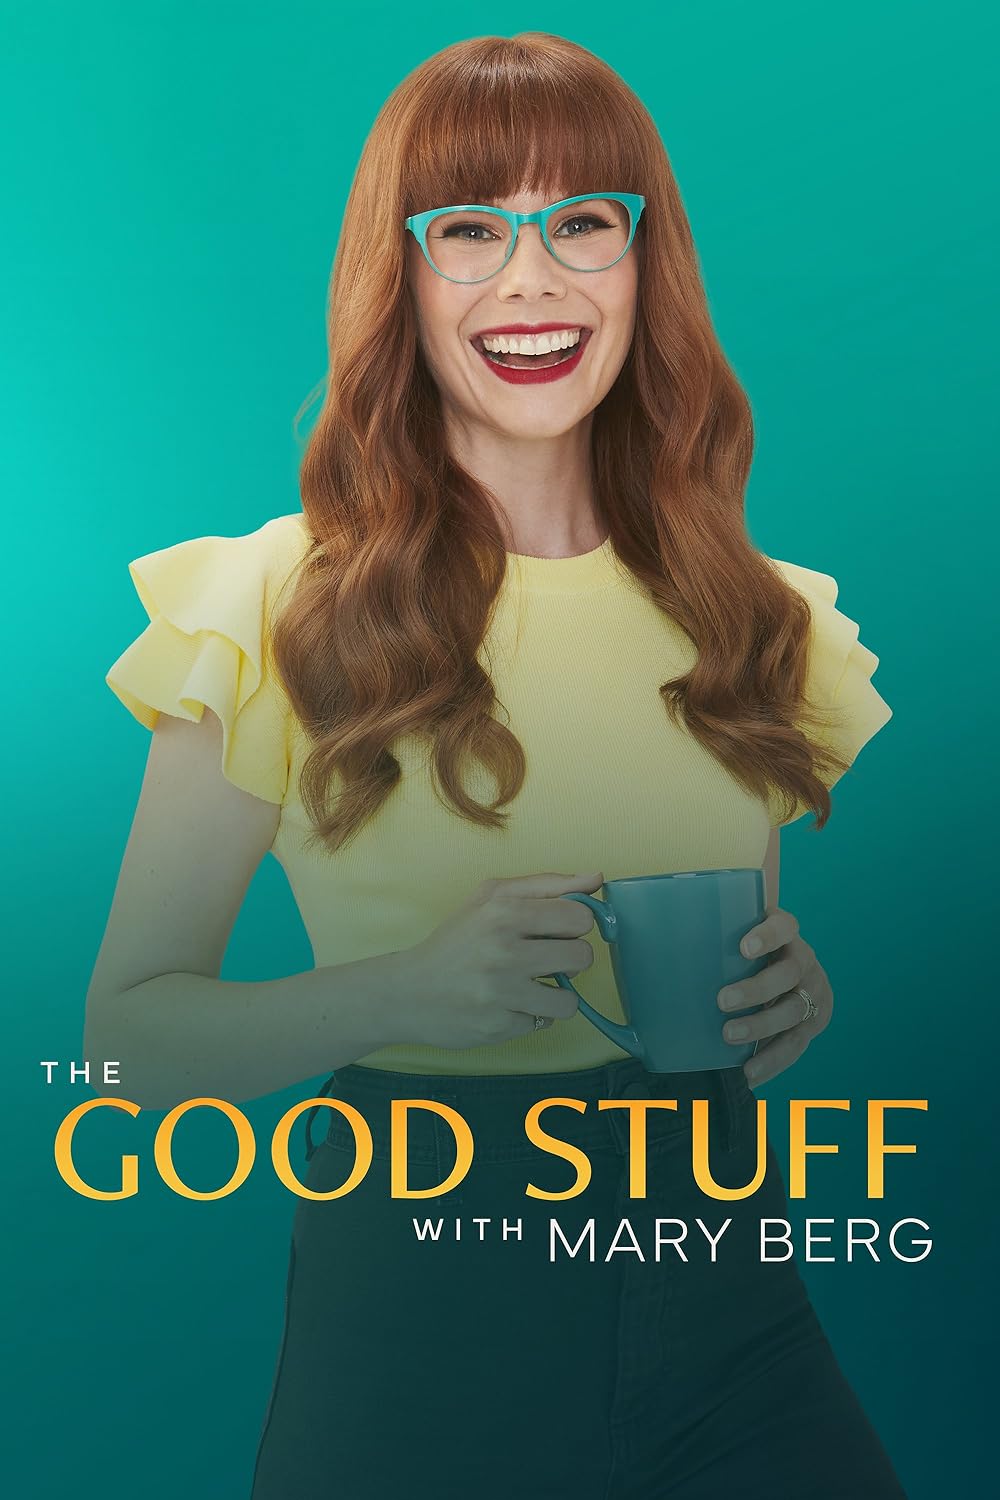 The Good Stuff with Mary Berg